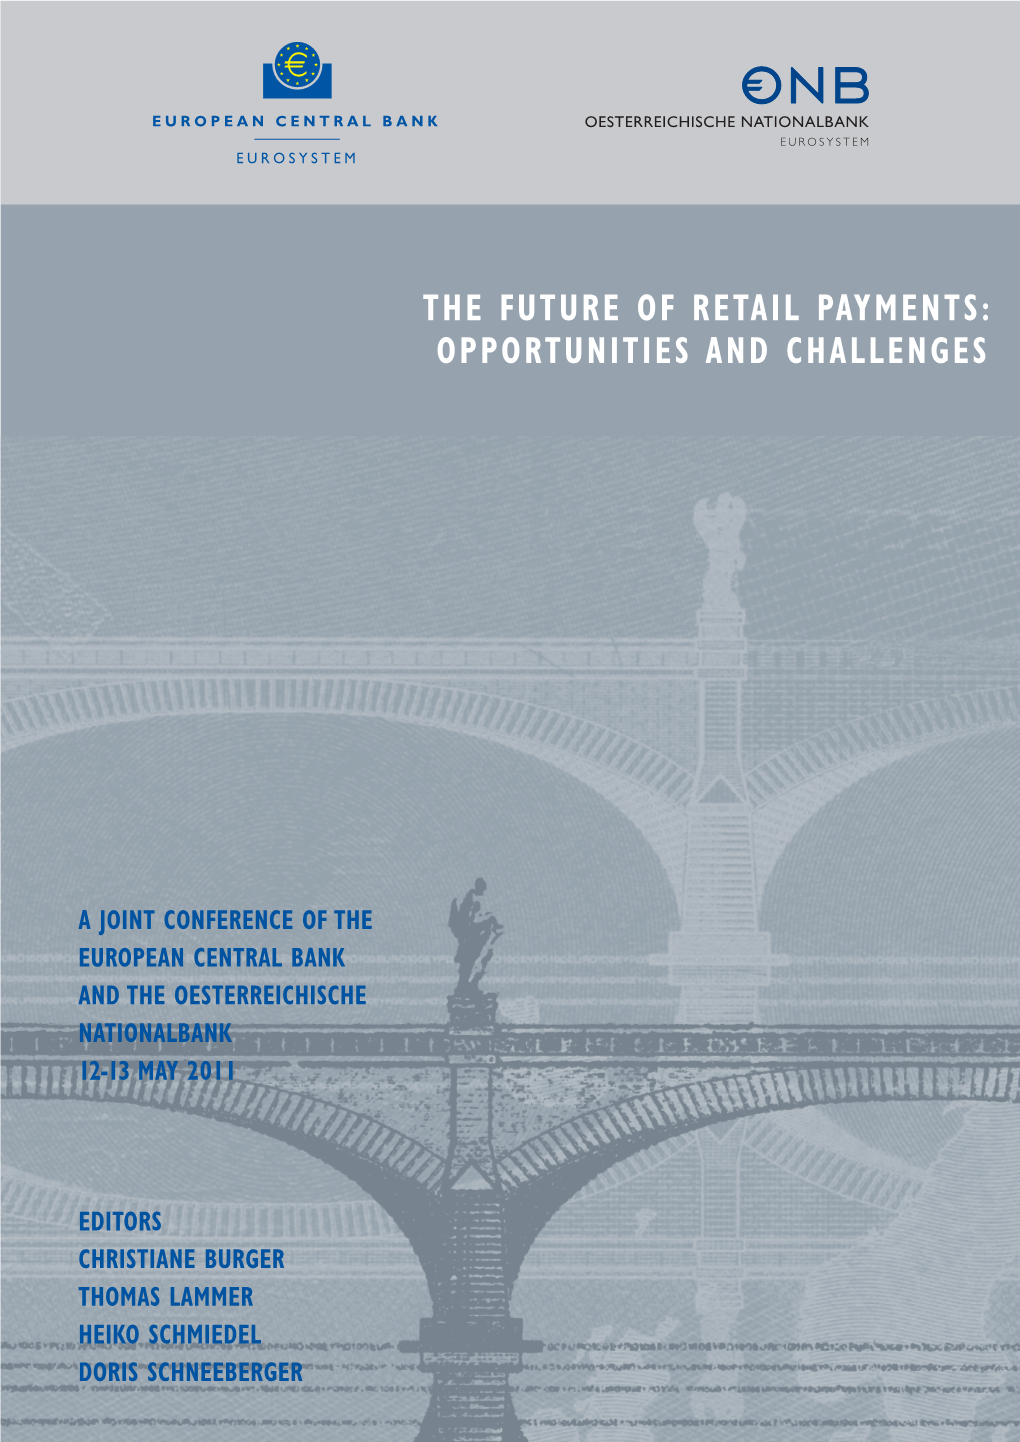 The Future of Retail Payments: Opportunities and Challenges